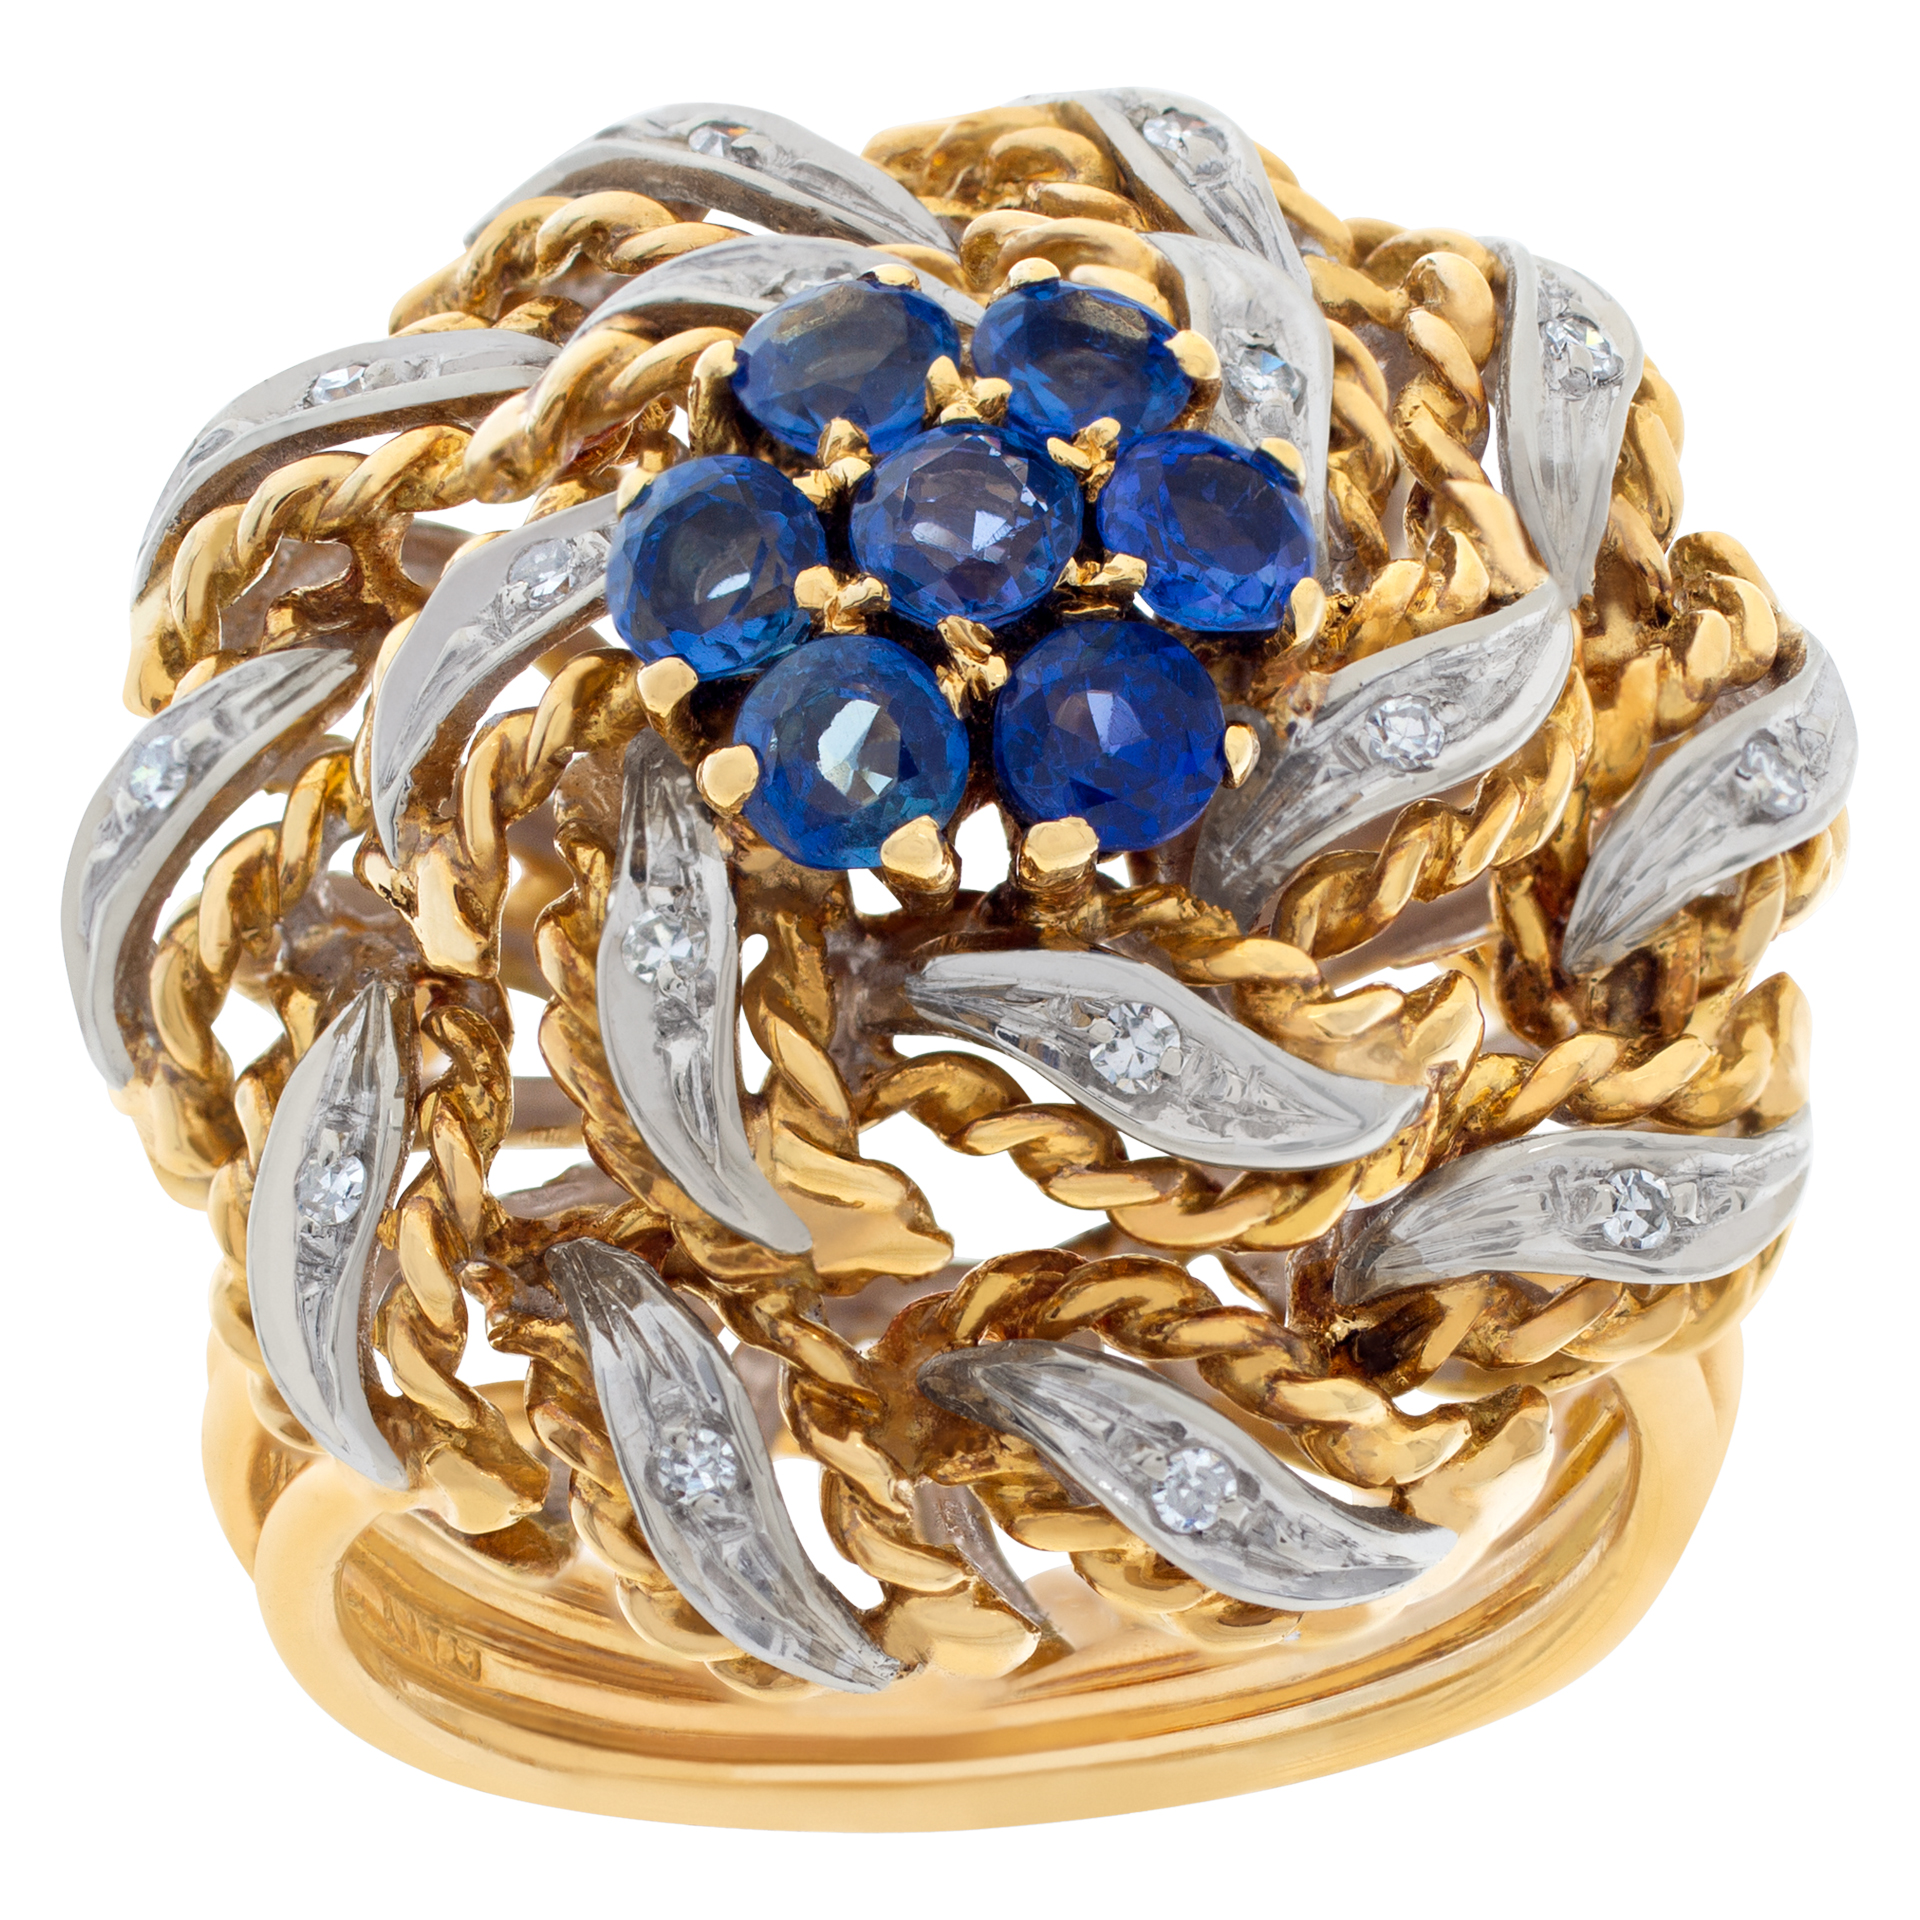 VIntage circa 1980's, Diamonds & Sapphire cocktail ring set in 18k white and yellow gold. image 1